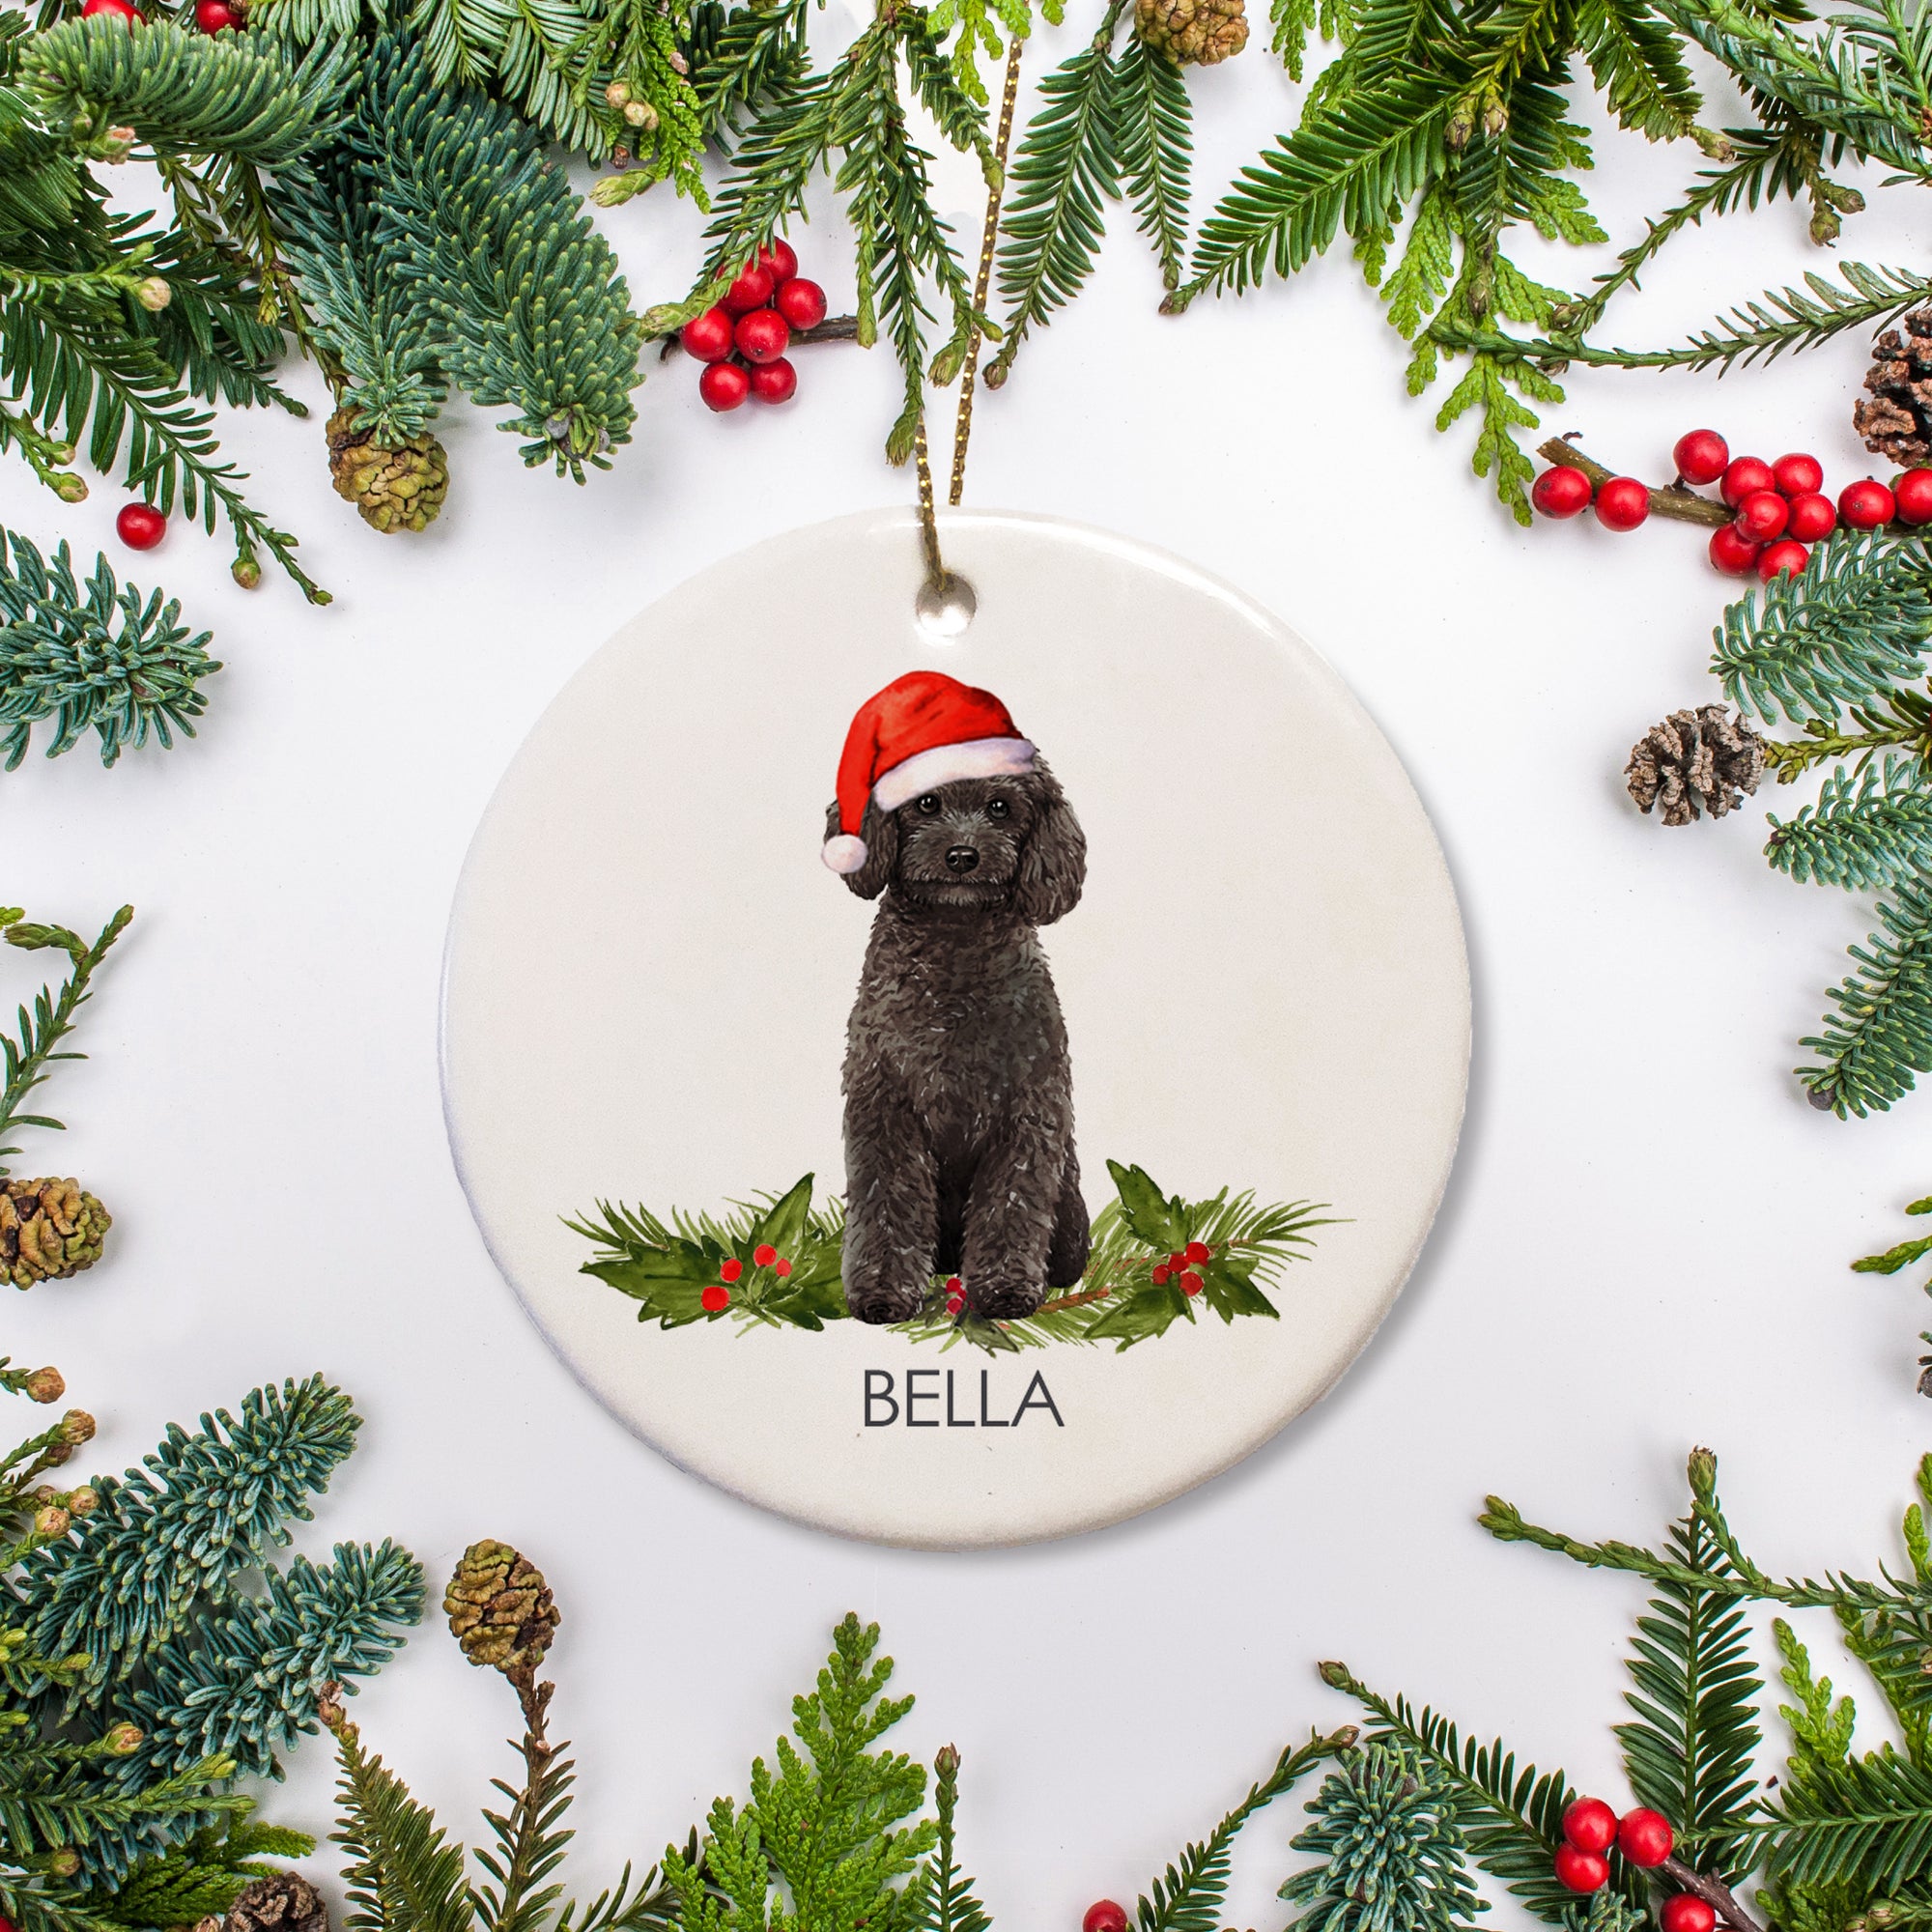 Poodle Personalized Christmas ornament, featuring a black poodle